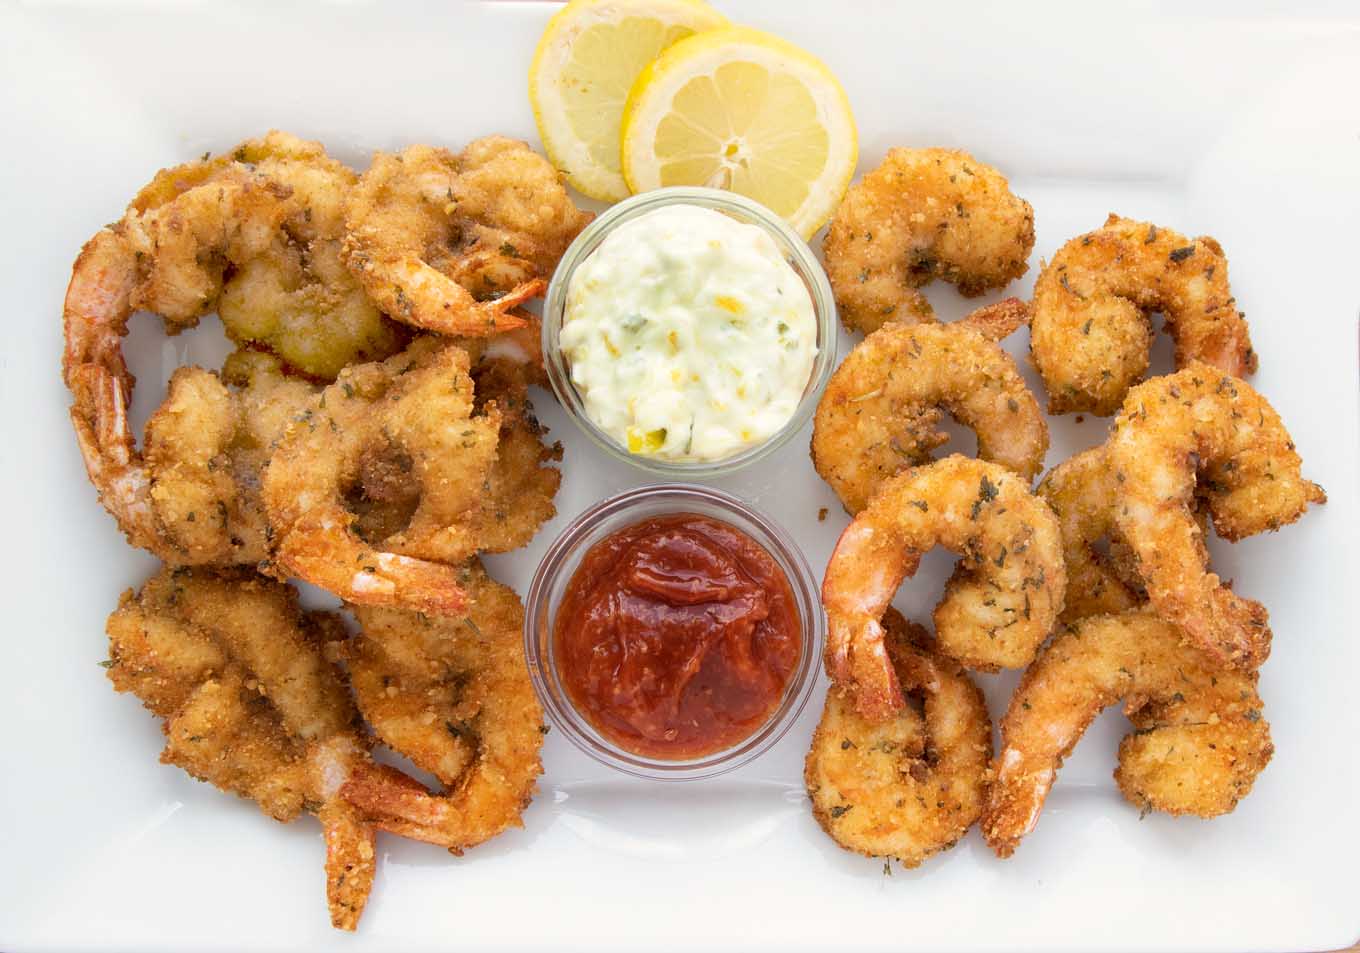 fried butterfly shrimp and fried regular shrimp on a white platter with tartar sauce, cocktail sauce and lemon slices